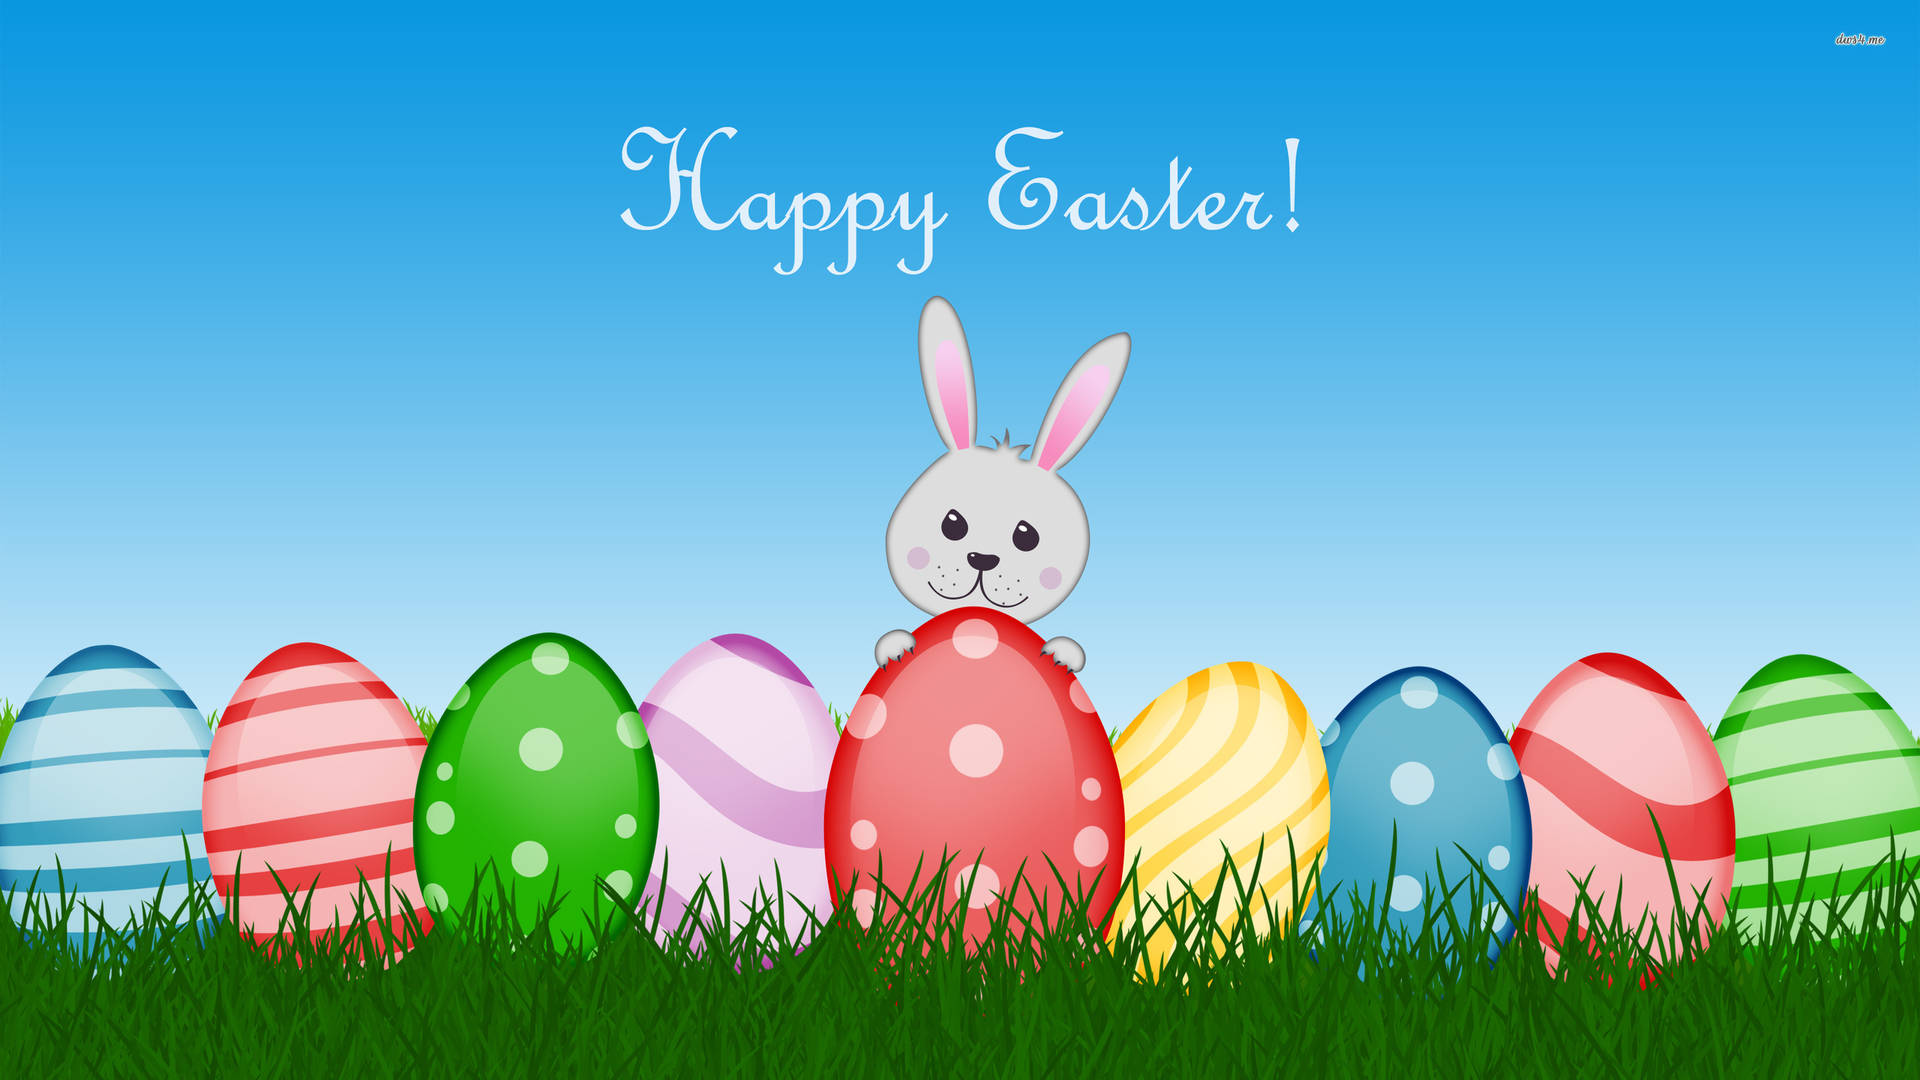 Cute Happy Easter Greeting Background